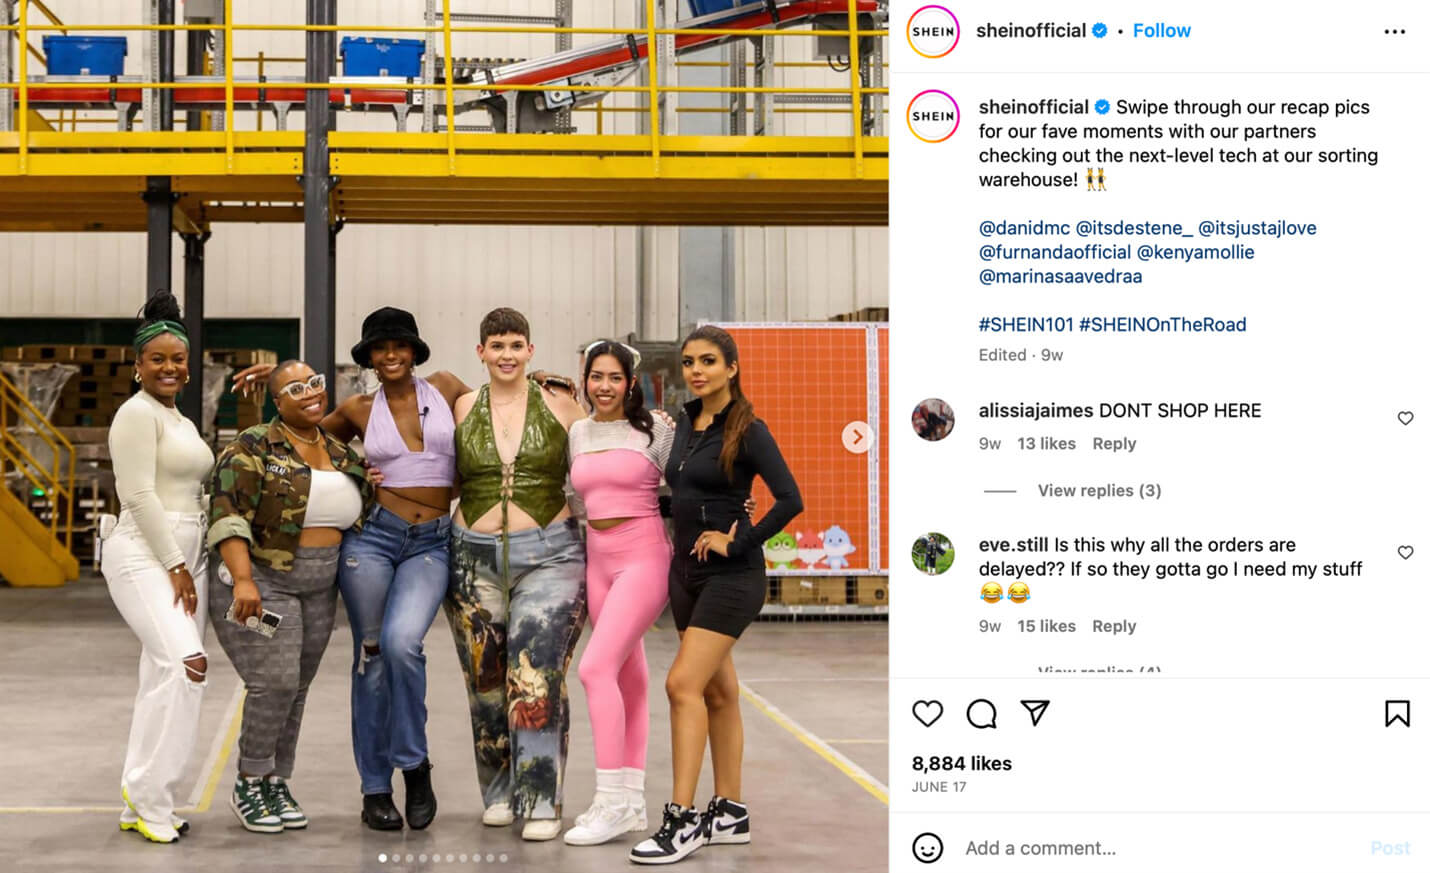 They weren't even sweating” - influencers criticised following